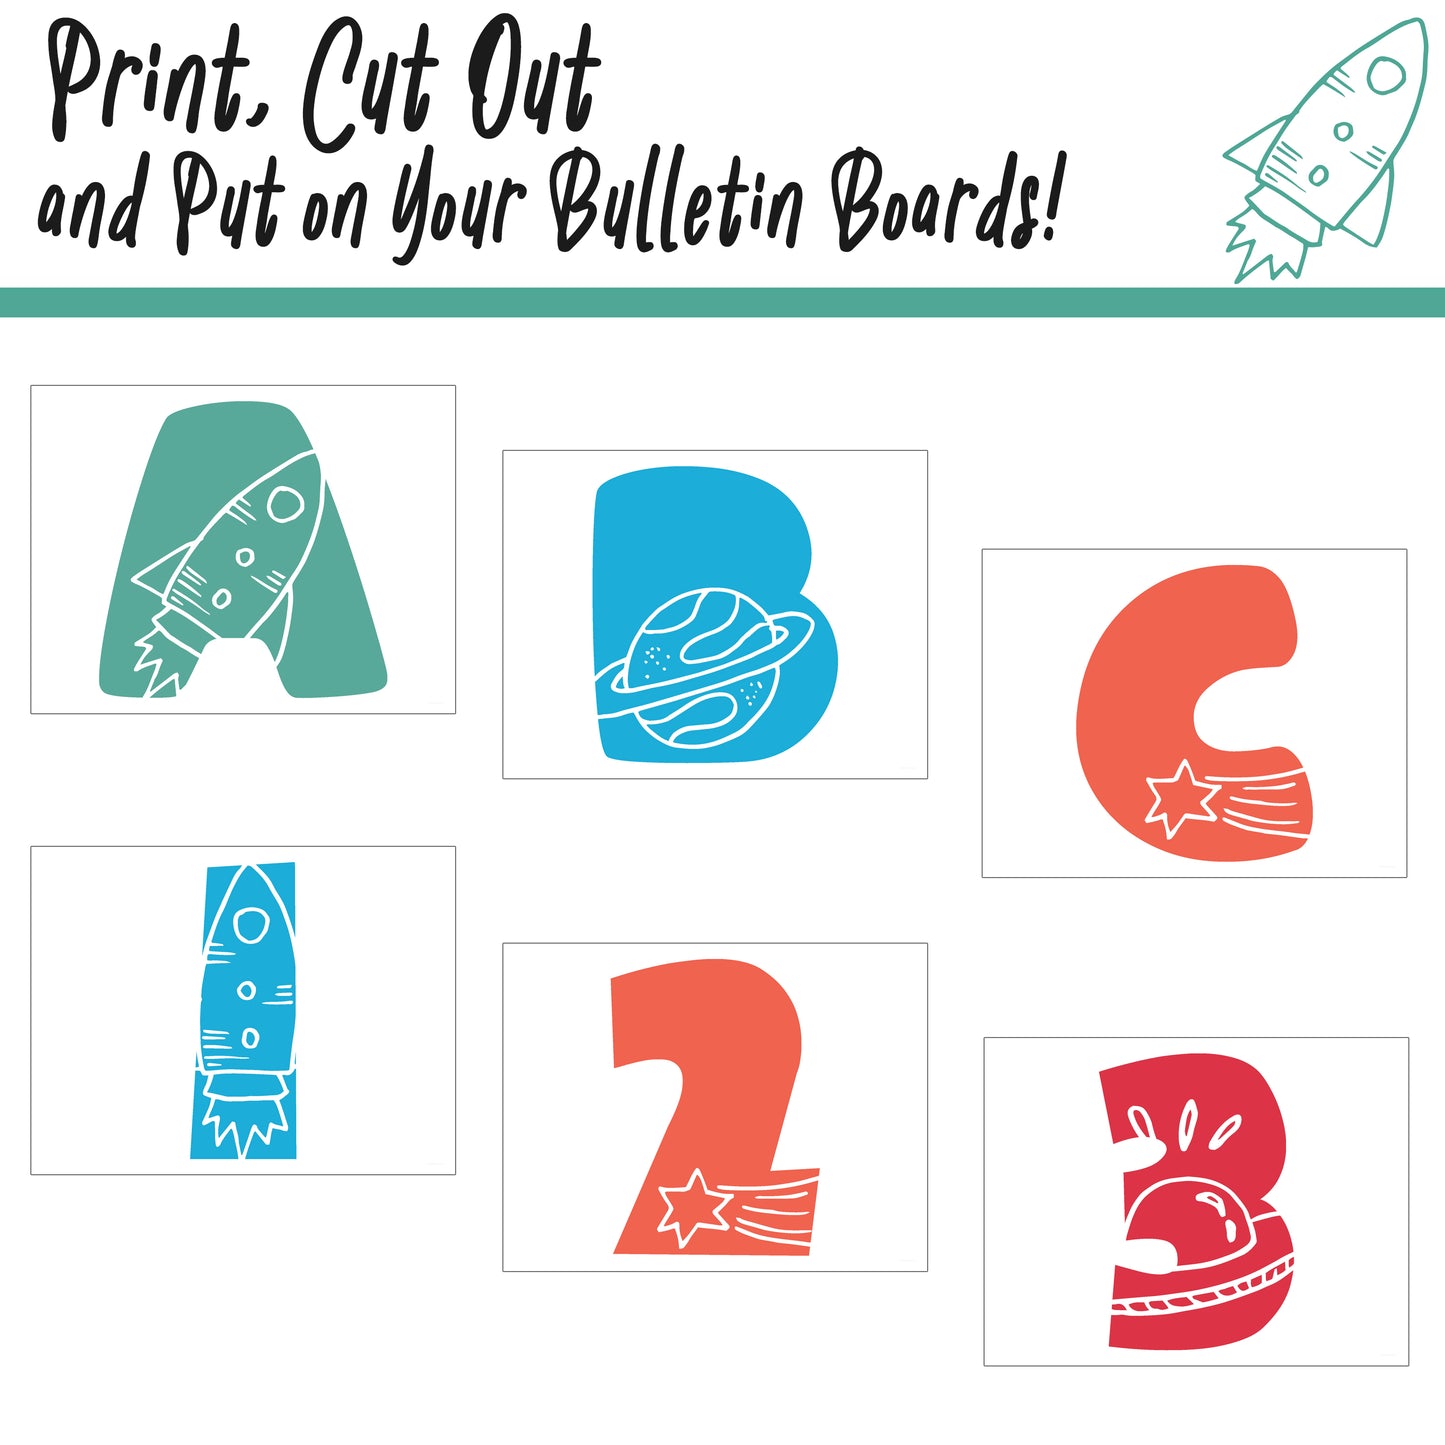 Space Bulletin Board Letters | A - Z, Letters and Numbers,1 and 2 Per Page, Colorful Classroom Decor